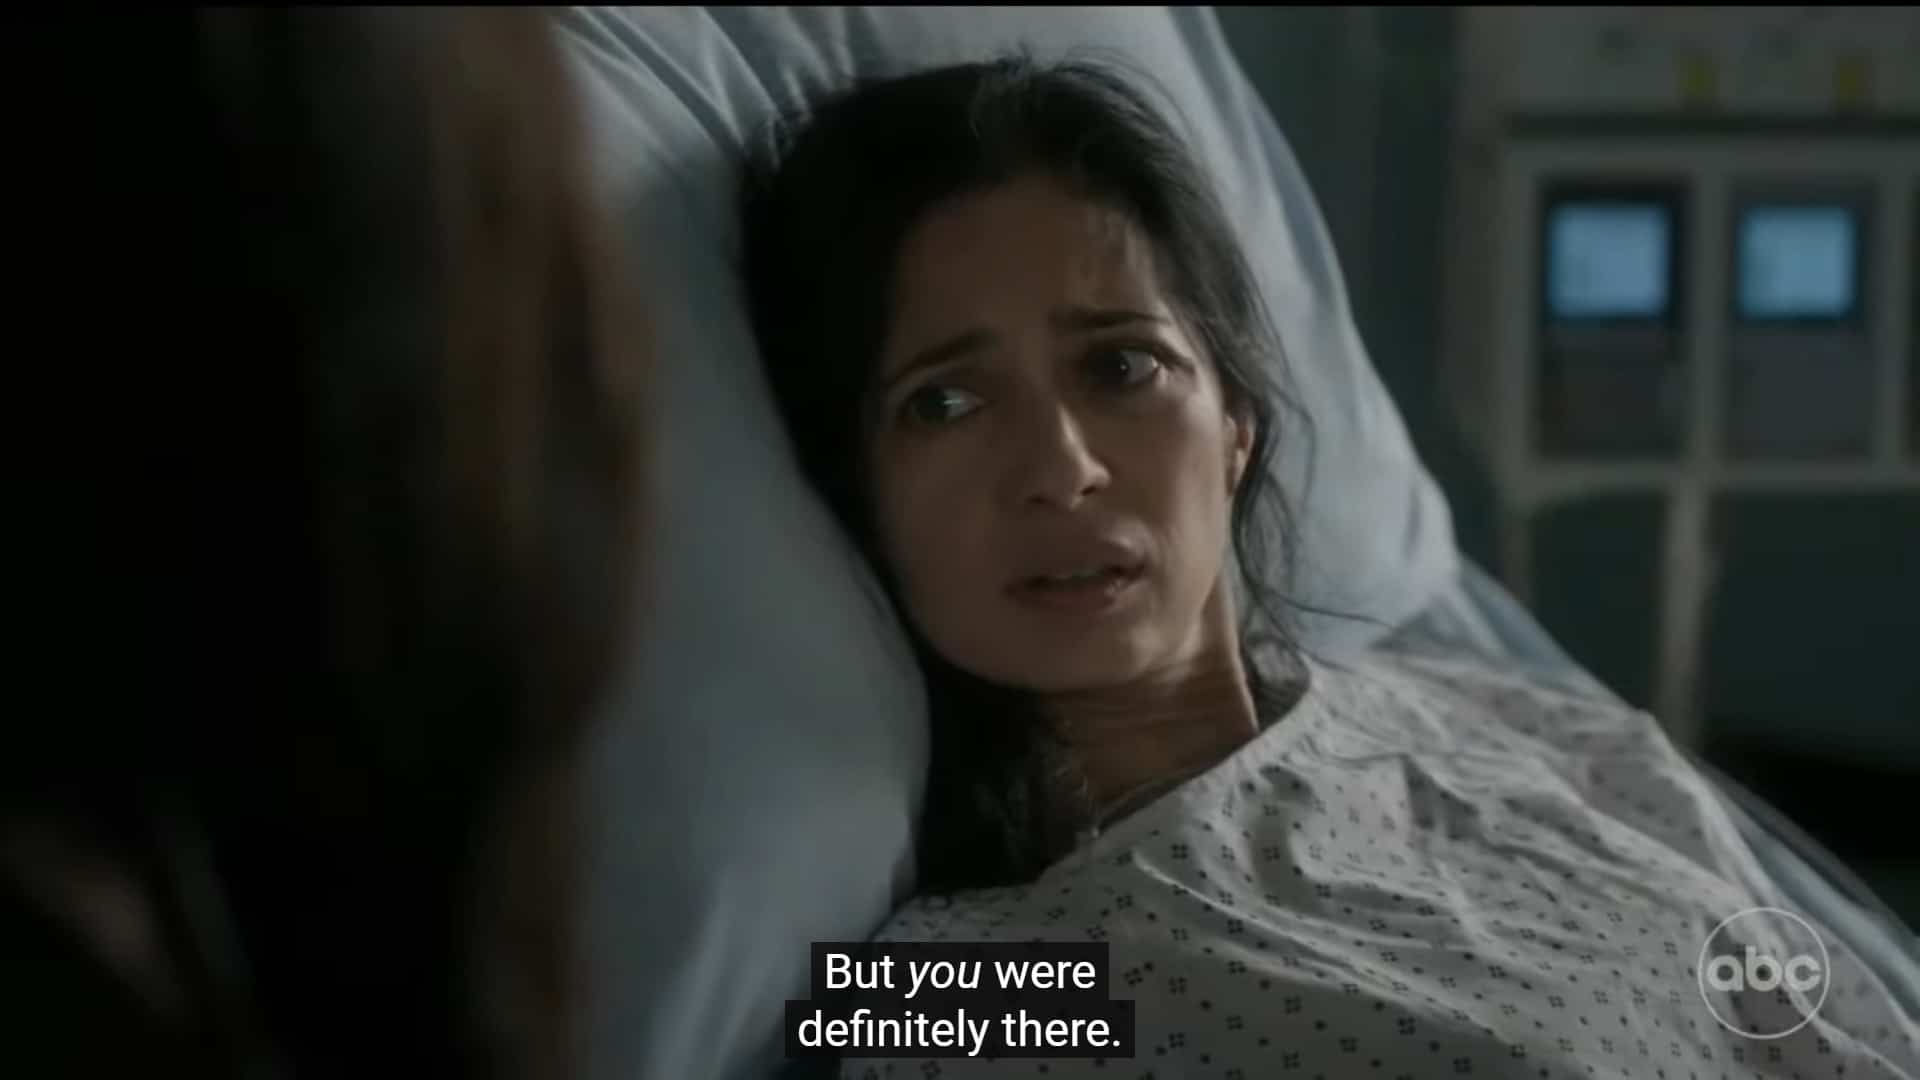 Naveen (Aarti Mann) recalling Luna being in the surgical room when a towel was left inside of her